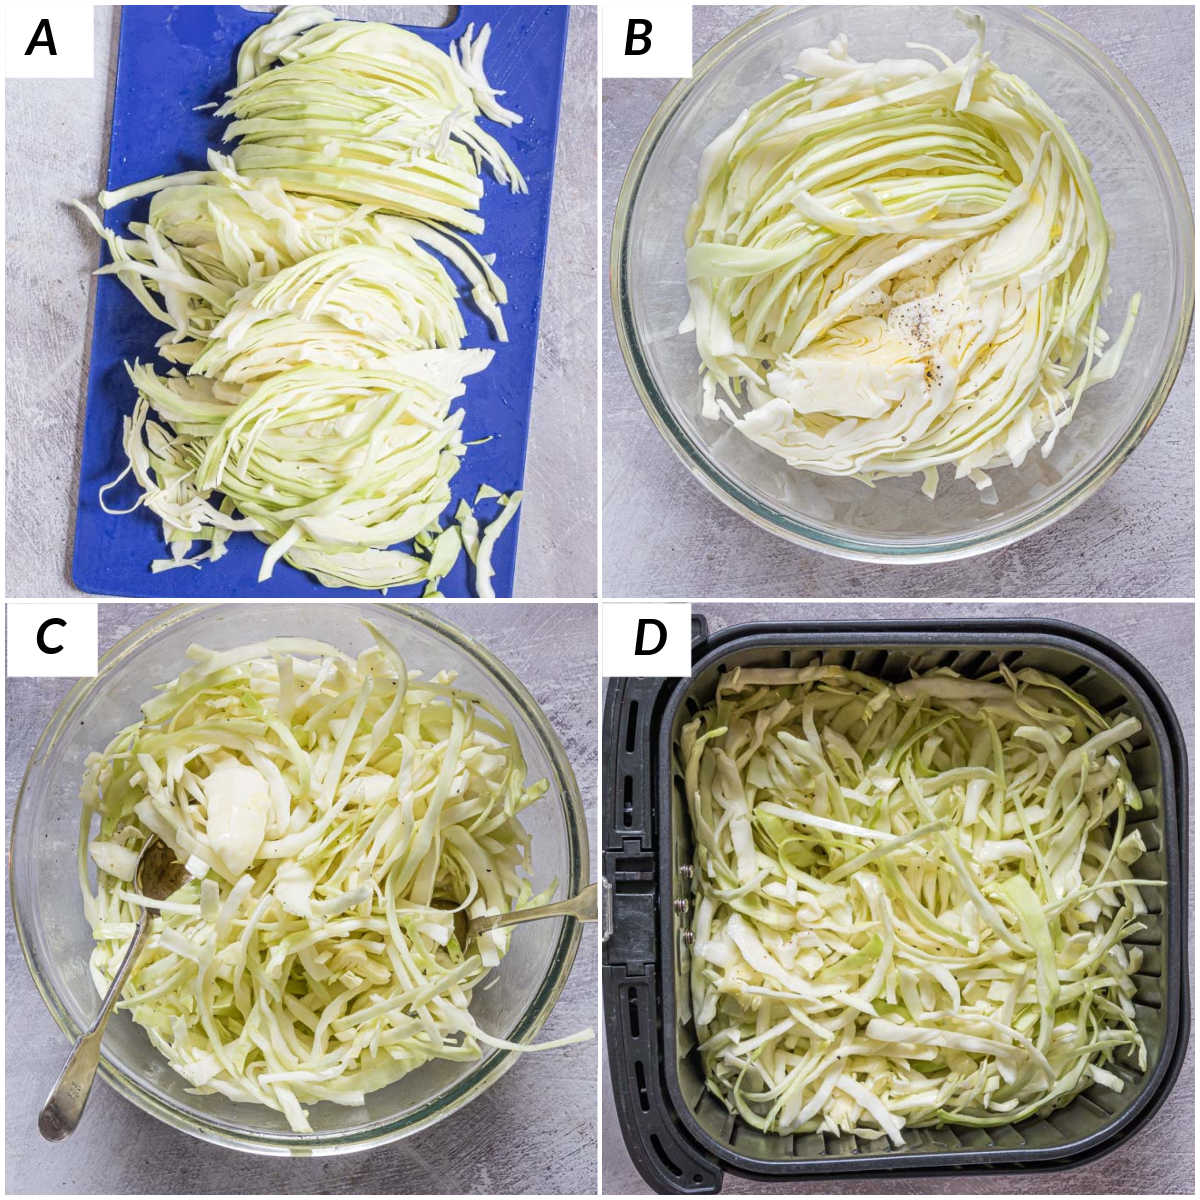 image collage showing the steps for making air fryer cabbage.